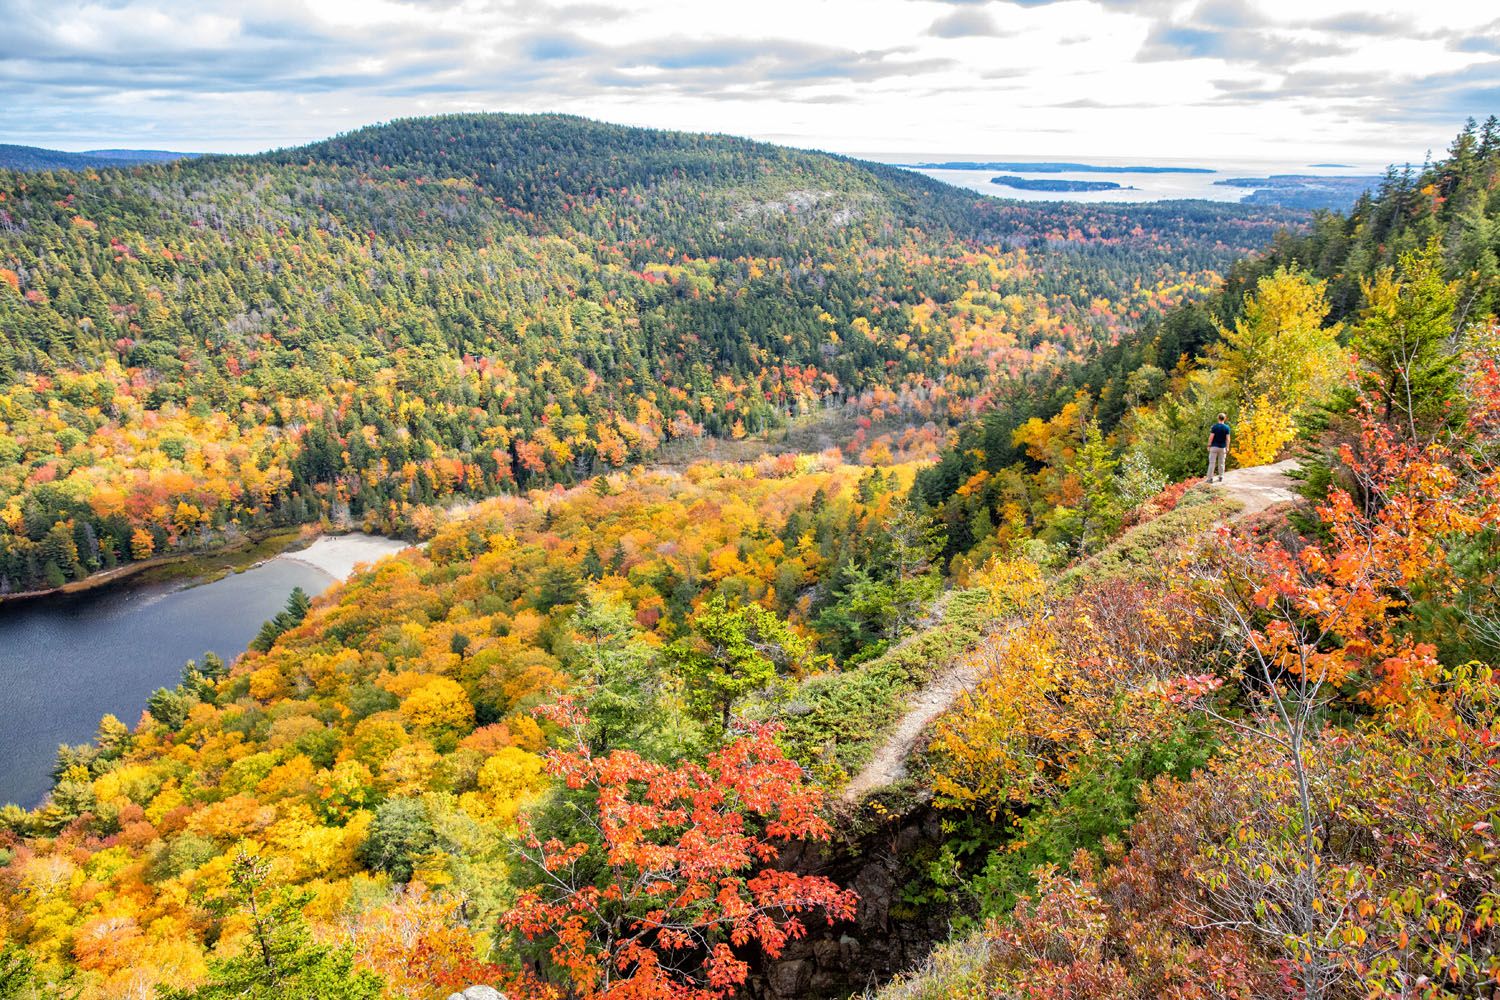 Acadia | National Parks that require reservations